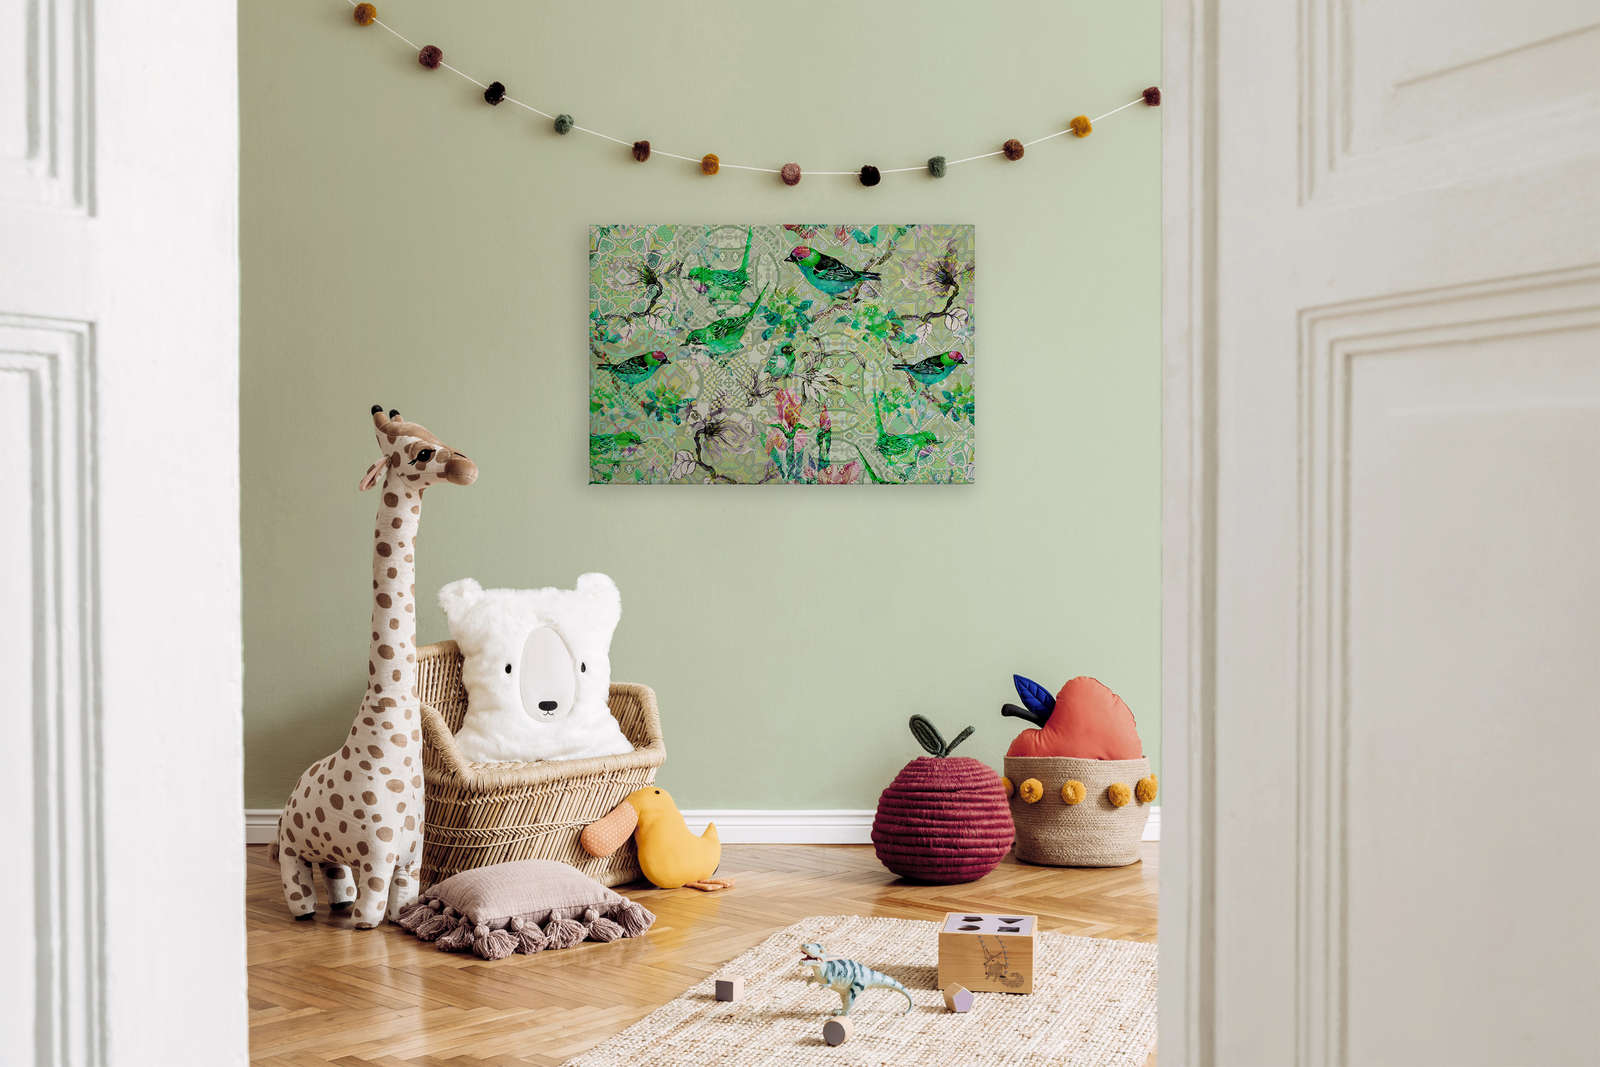             Bird Canvas Painting Green with Mosaic Pattern - 0.90 m x 0.60 m
        